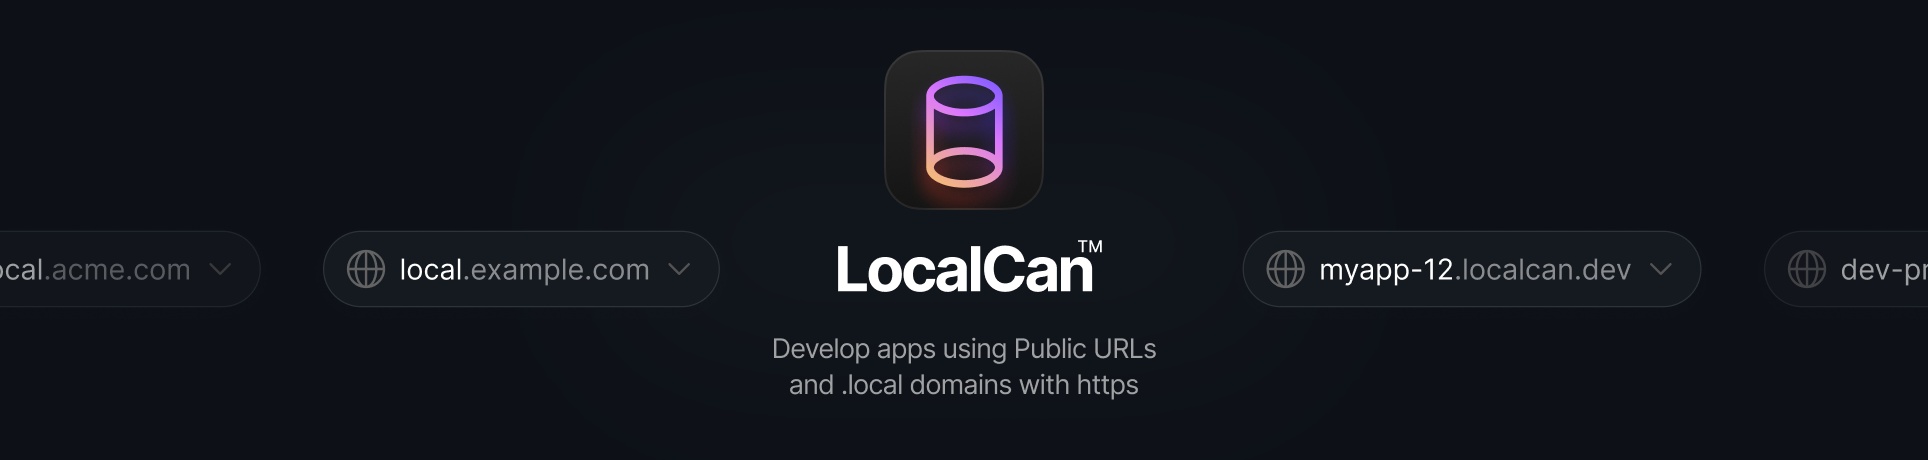 LocalCan™ – #1 Ngrok alternative. Without subscription. With .local domains and top-rated UX.